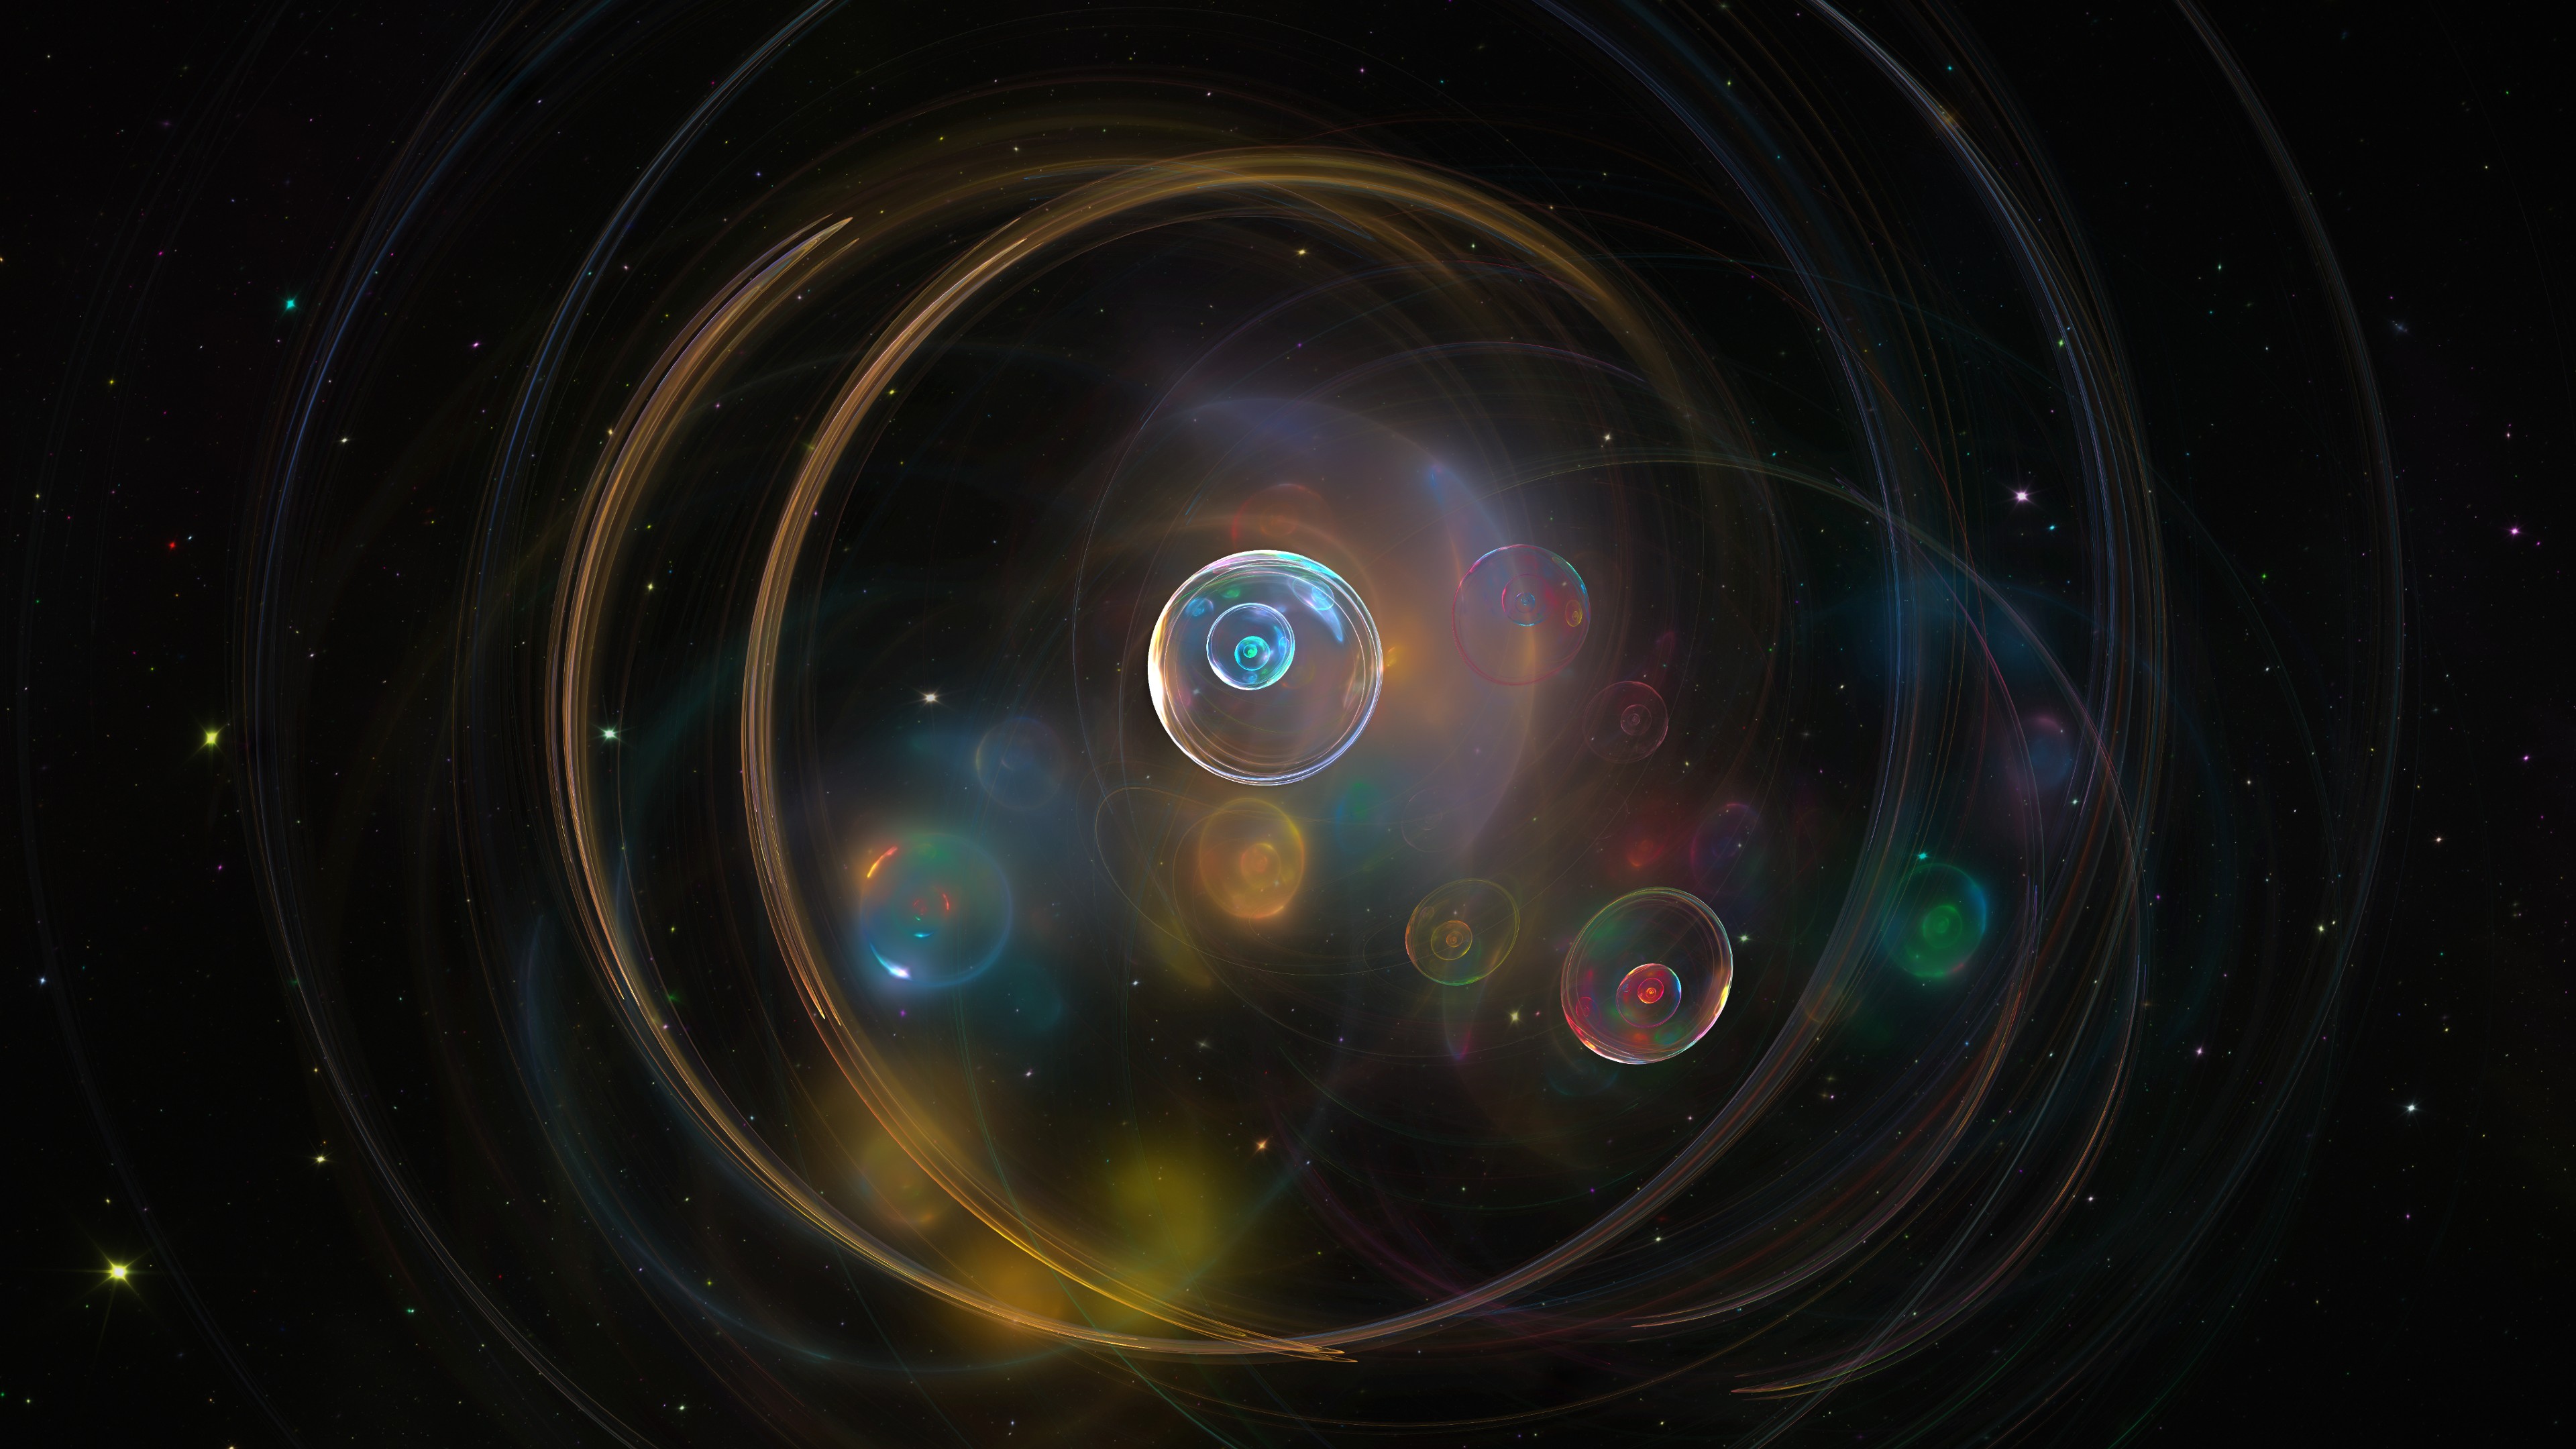 Abstract image featuring colorful, swirling light patterns and transparent bubbles against a dark, starry background.